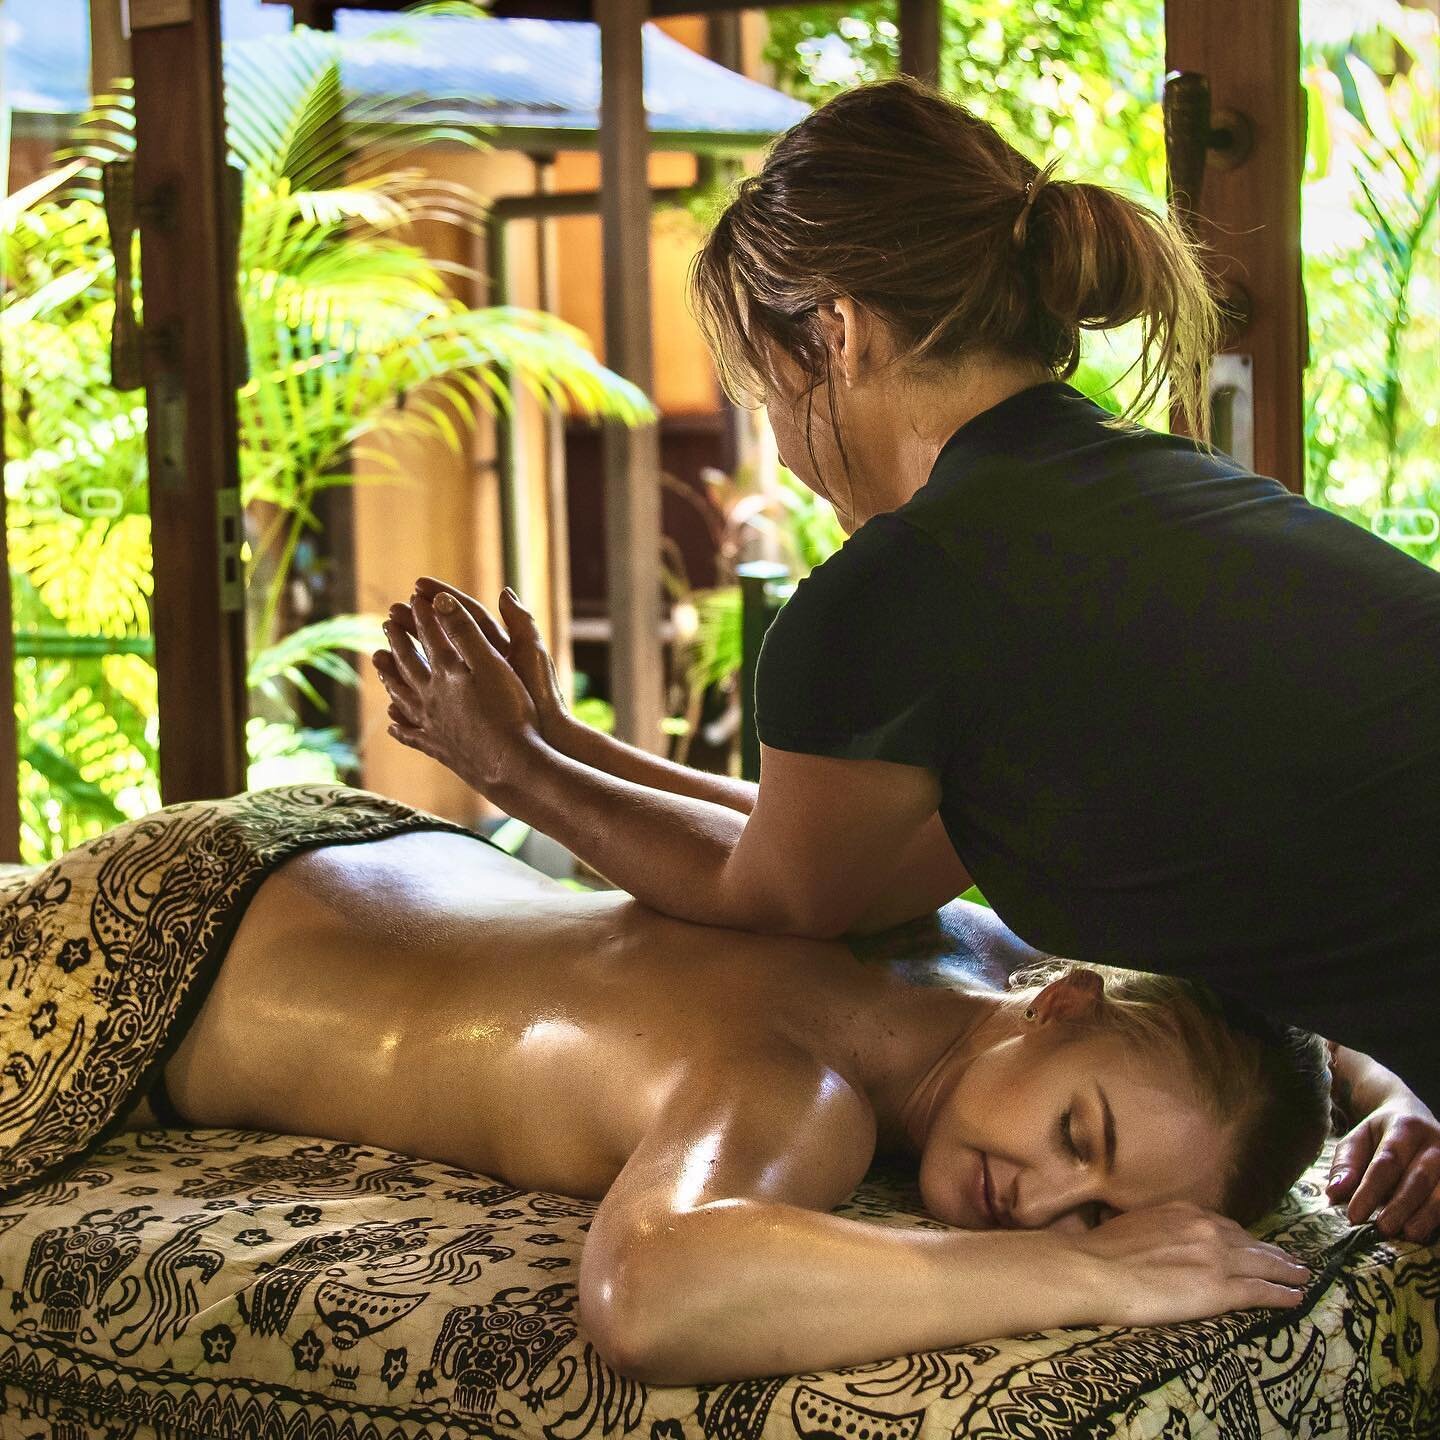 Can&rsquo;t travel to Bali this year? 🌴 Consider a visit to this beautiful Balinese-inspired day spa in Noosa instead! 

On our &lsquo;Bali by the Beach&rsquo; package, experience total relaxation at @ikatanspanoosa with a 90 minute hot stone couple